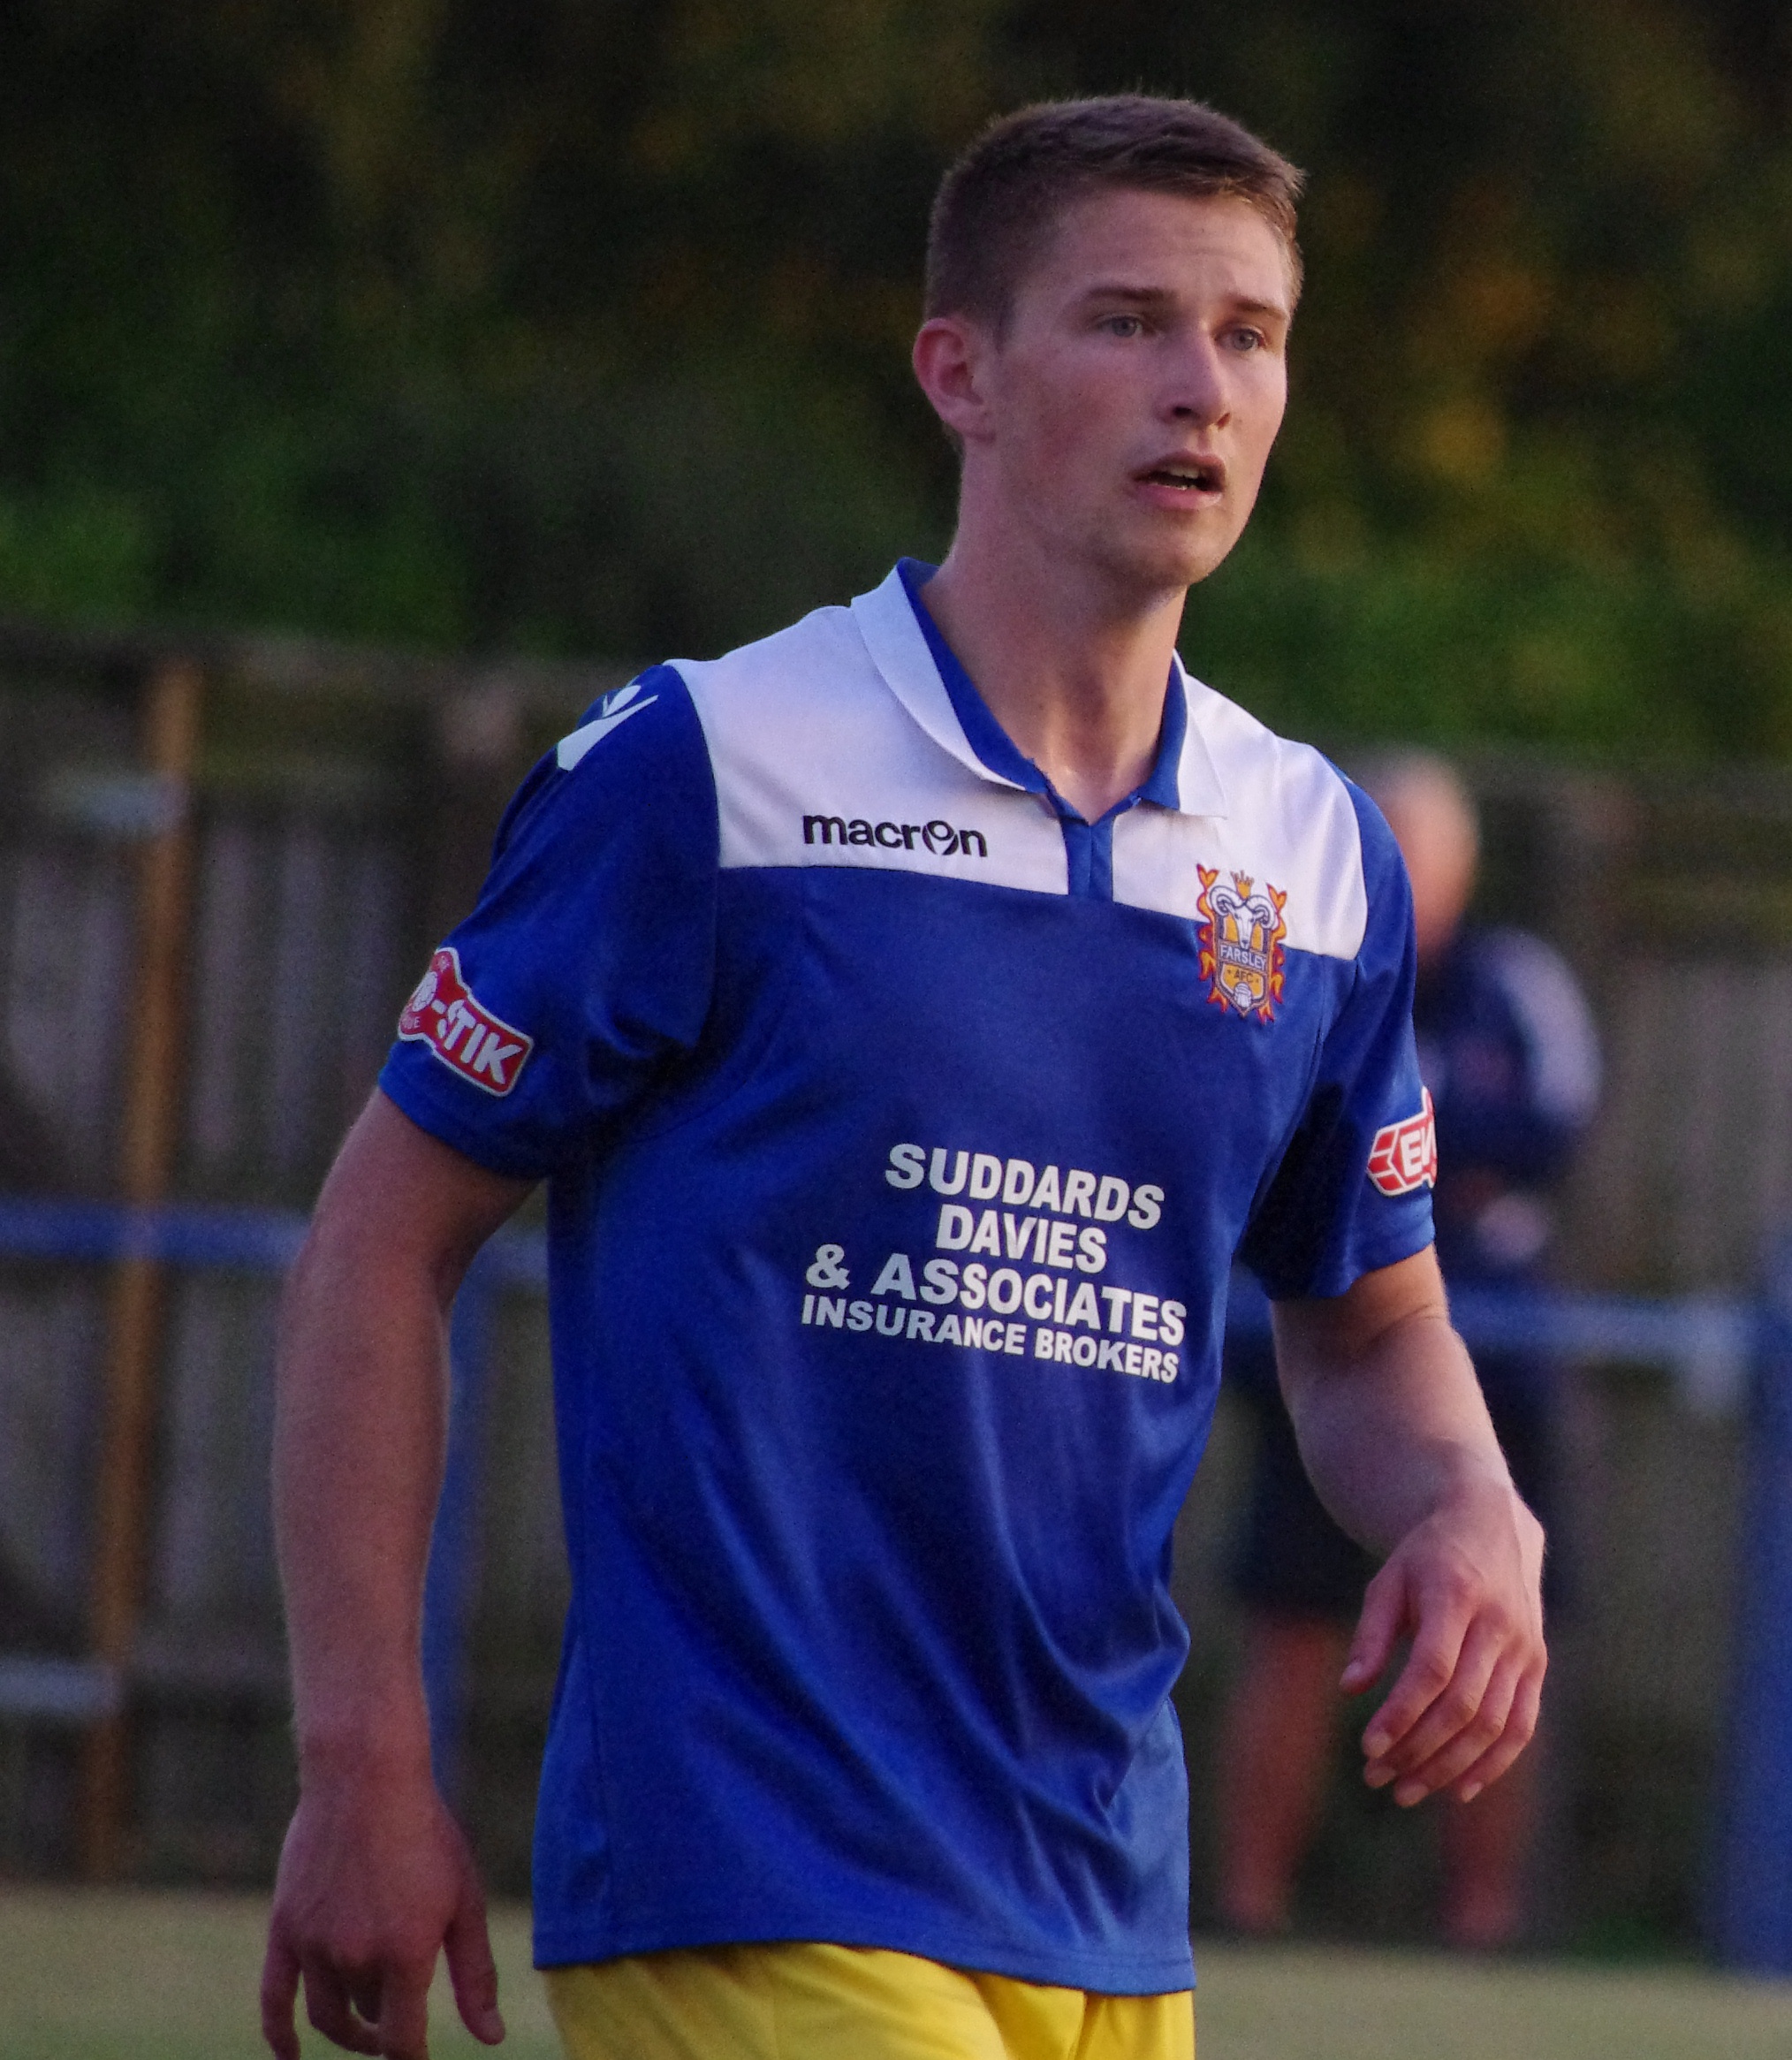 Danny Hull is staying at Farsley AFC, according to Neil Parsley